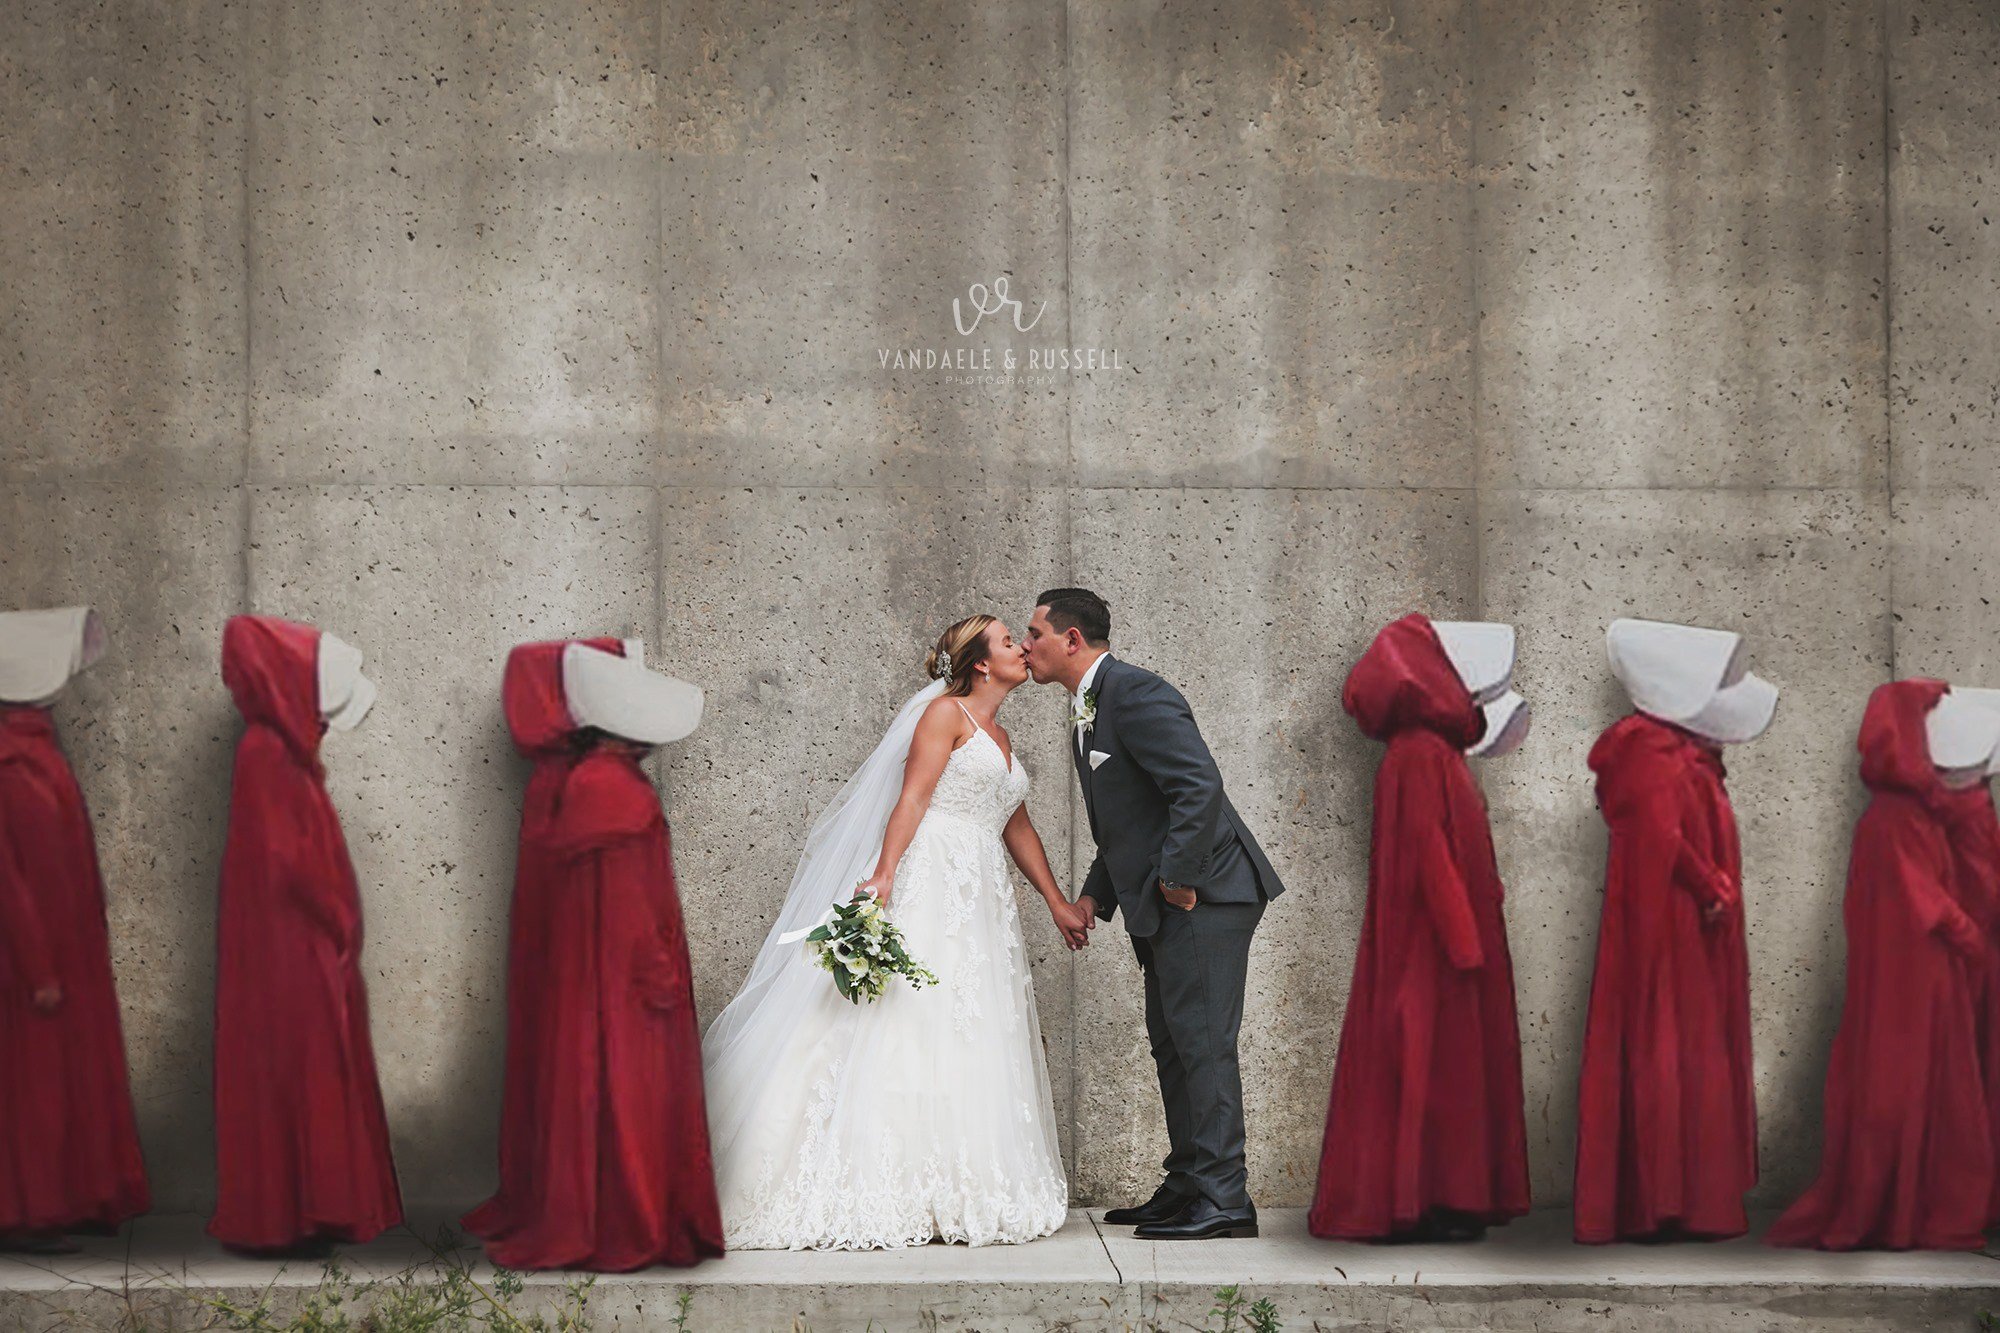 People Outraged Over Handmaids Tale Wedding Photo, Thats the Point says Photographer